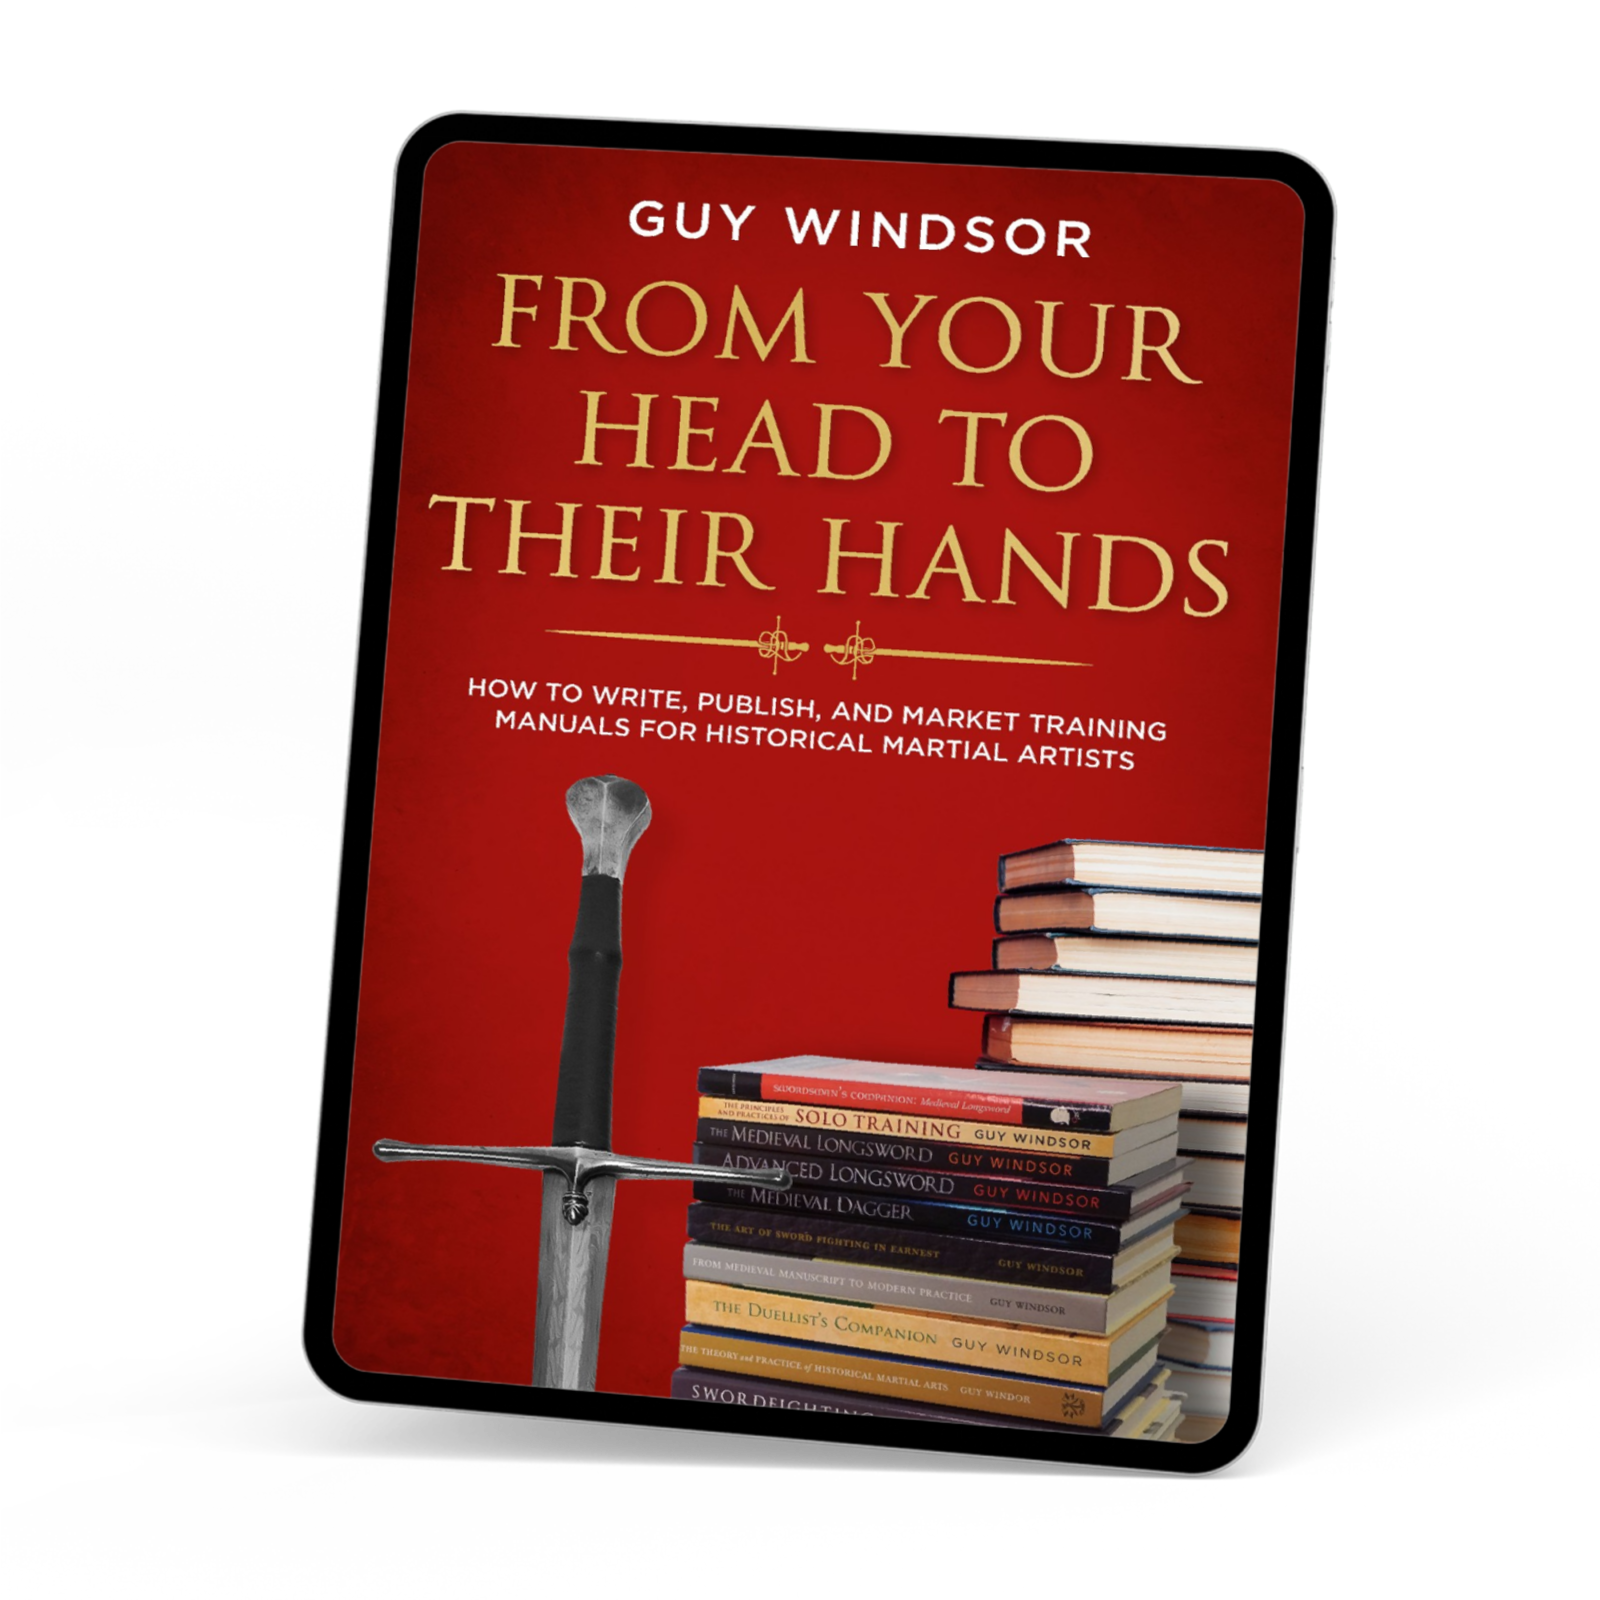 From Your Head to Their Hands: How to write, publish, and market training manuals for historical martial arts by Guy Windsor